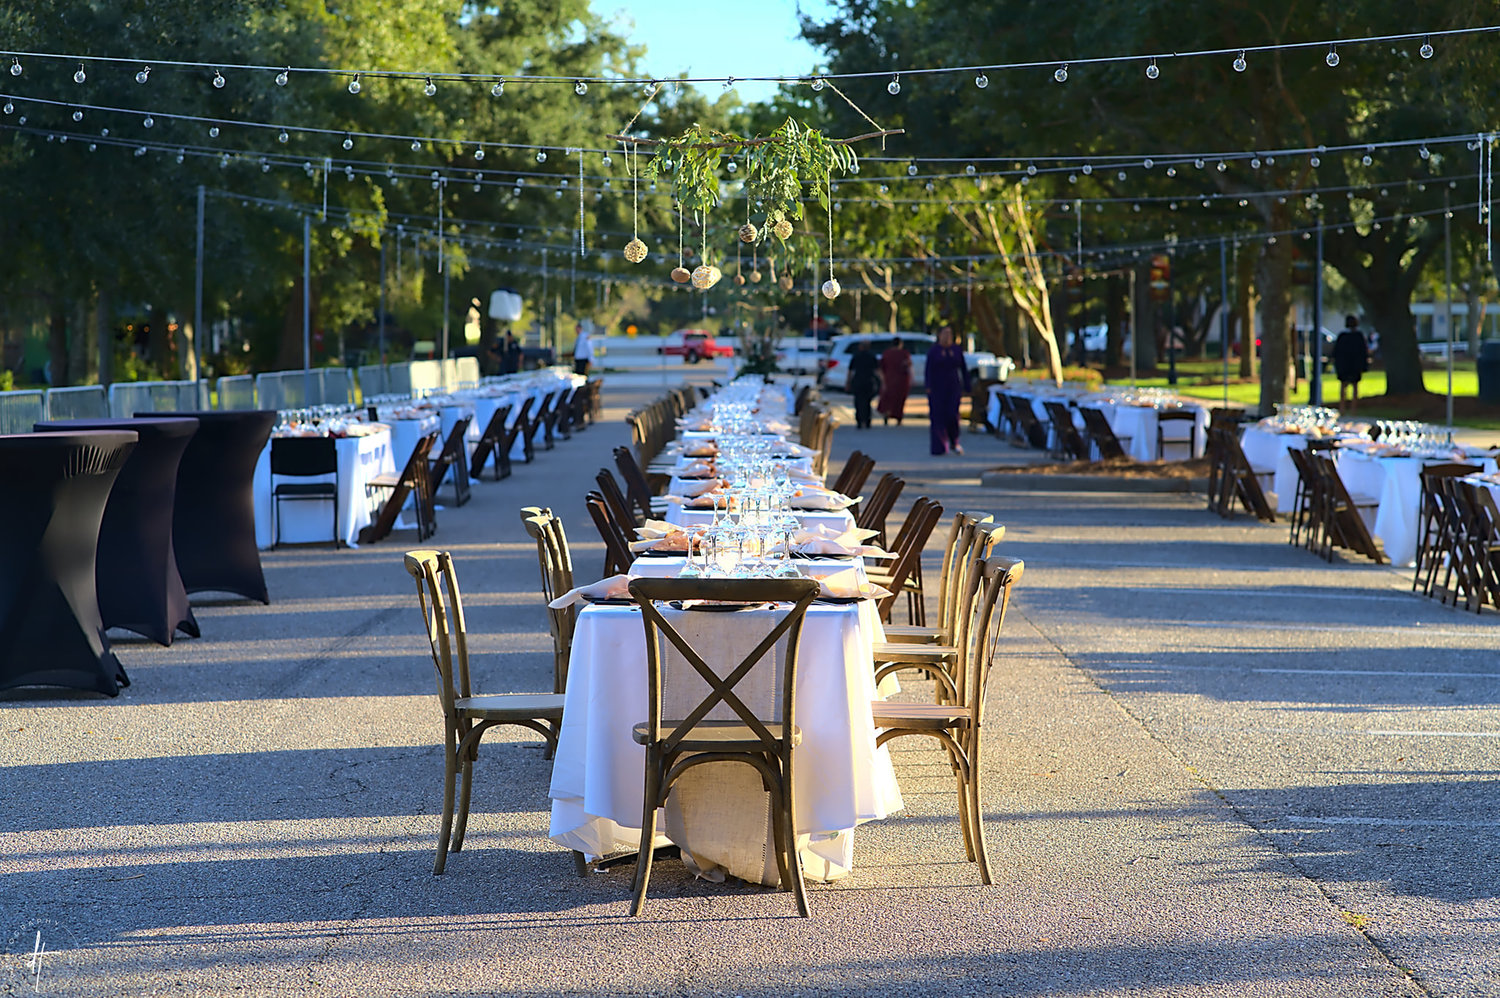 Diners will enjoy an alfresco four course meal prepared by notable local chefs. Each delectable dish will feature a wine pairing from Pinnacle Imports.